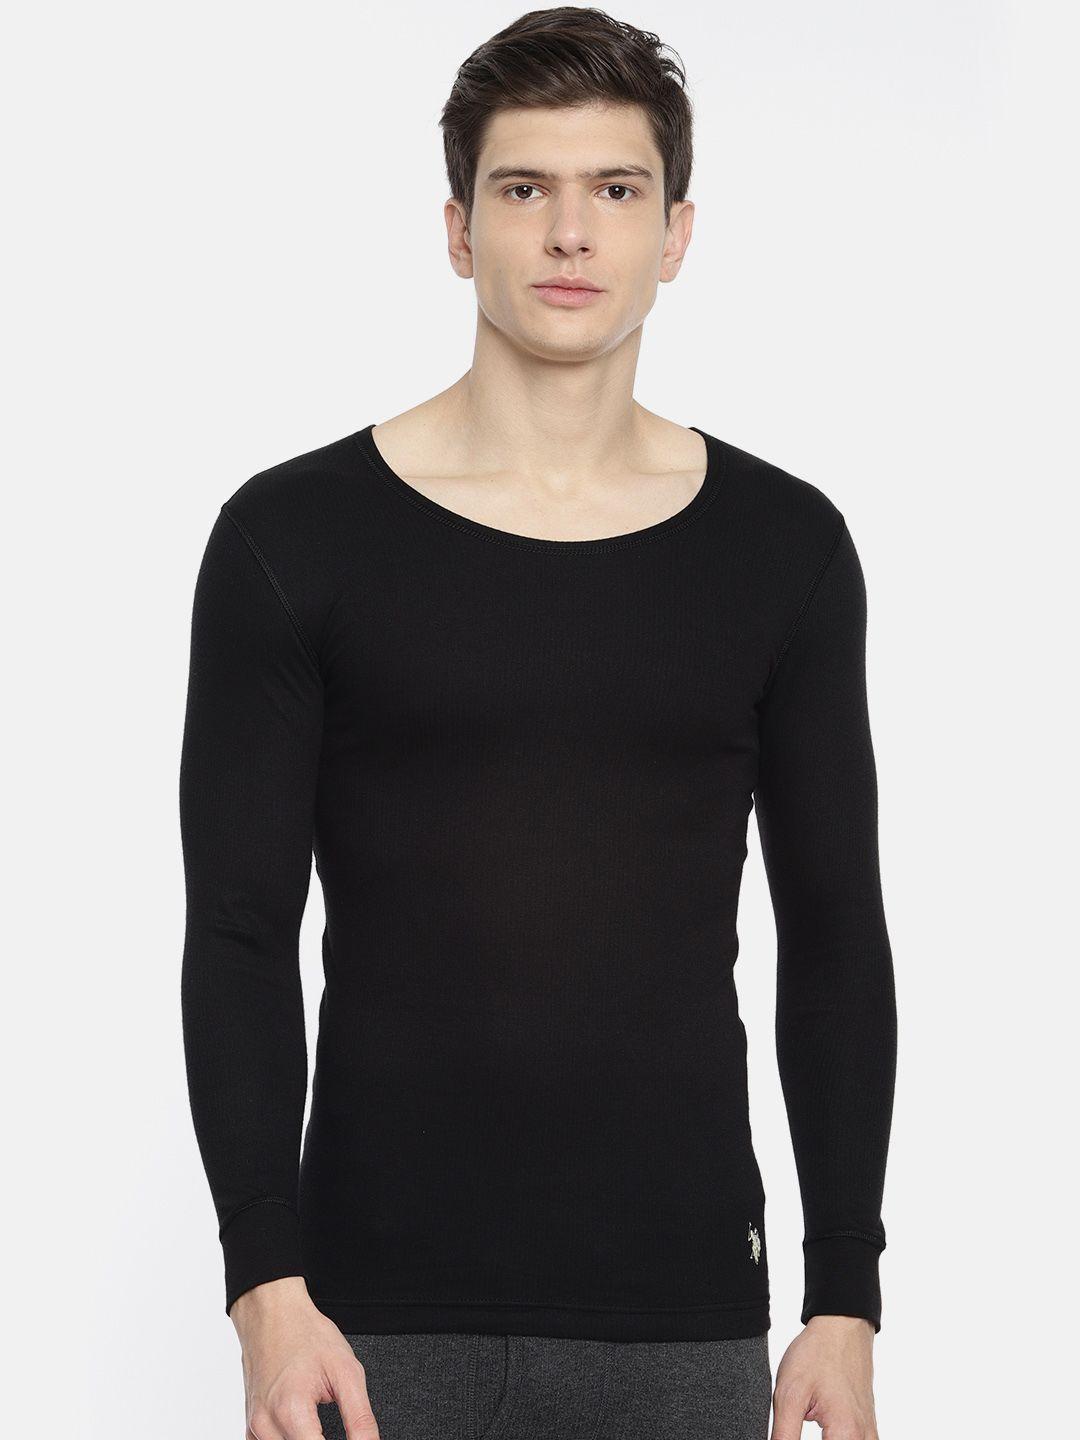 u.s. polo assn. men black solid round neck knitted thermal t-shirt i652-002-pl-l